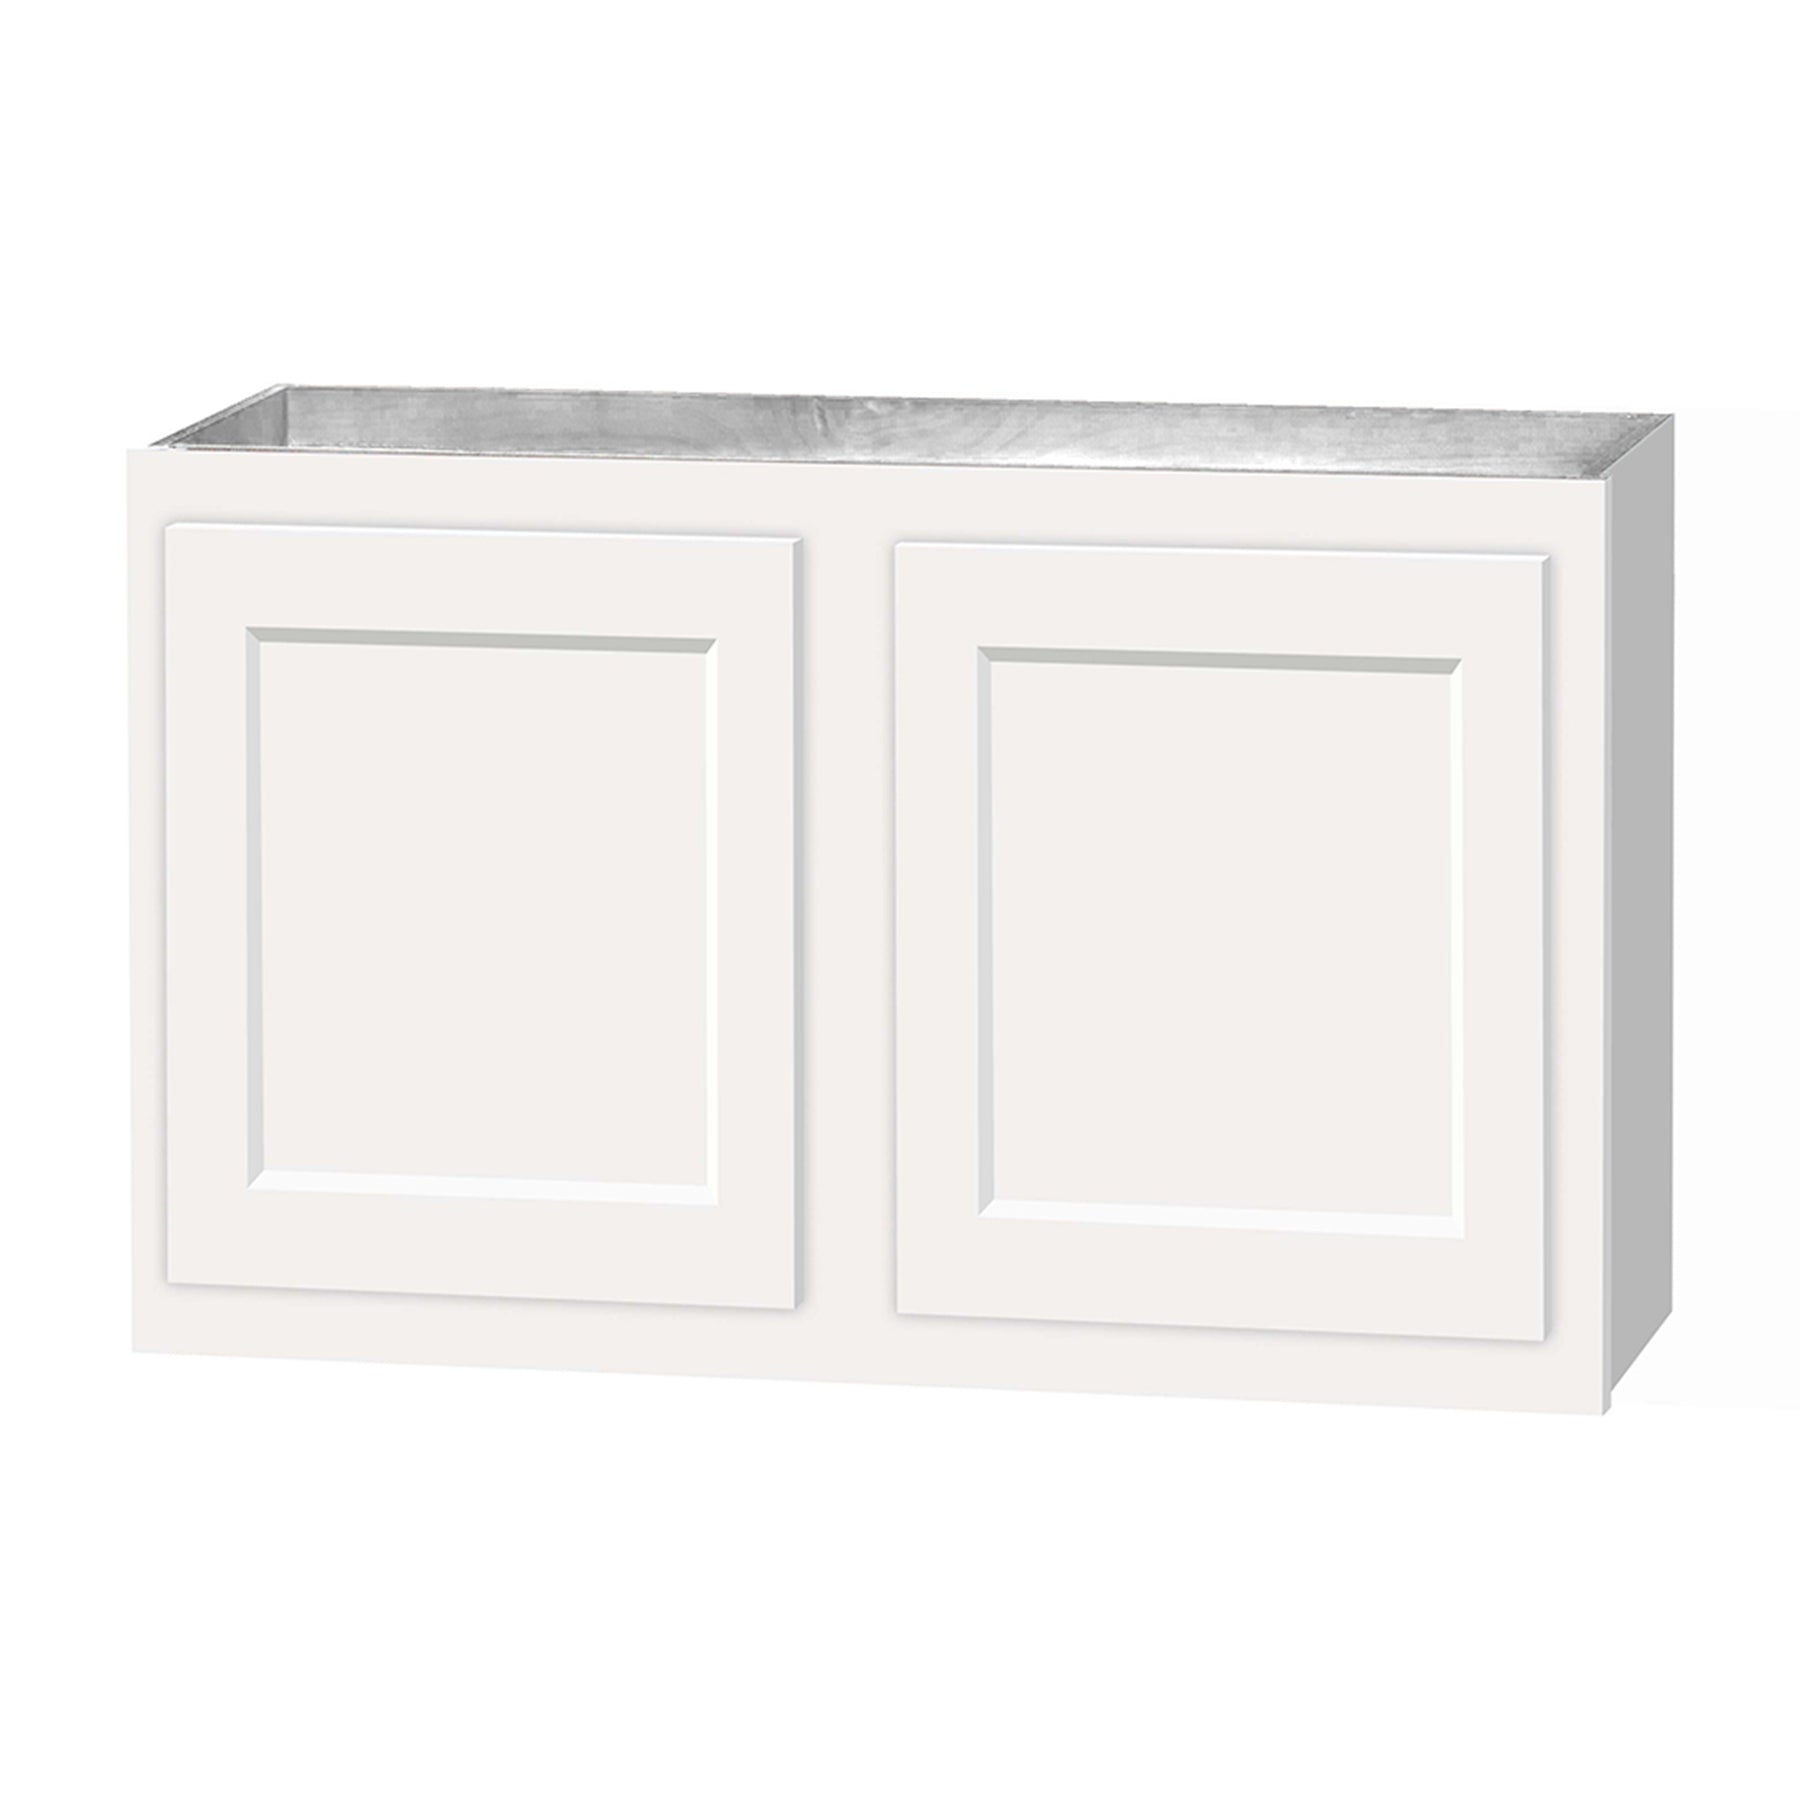 18 inch Wall Cabinets - Dwhite Shaker - 30 Inch W x 18 Inch H x 12 Inch D